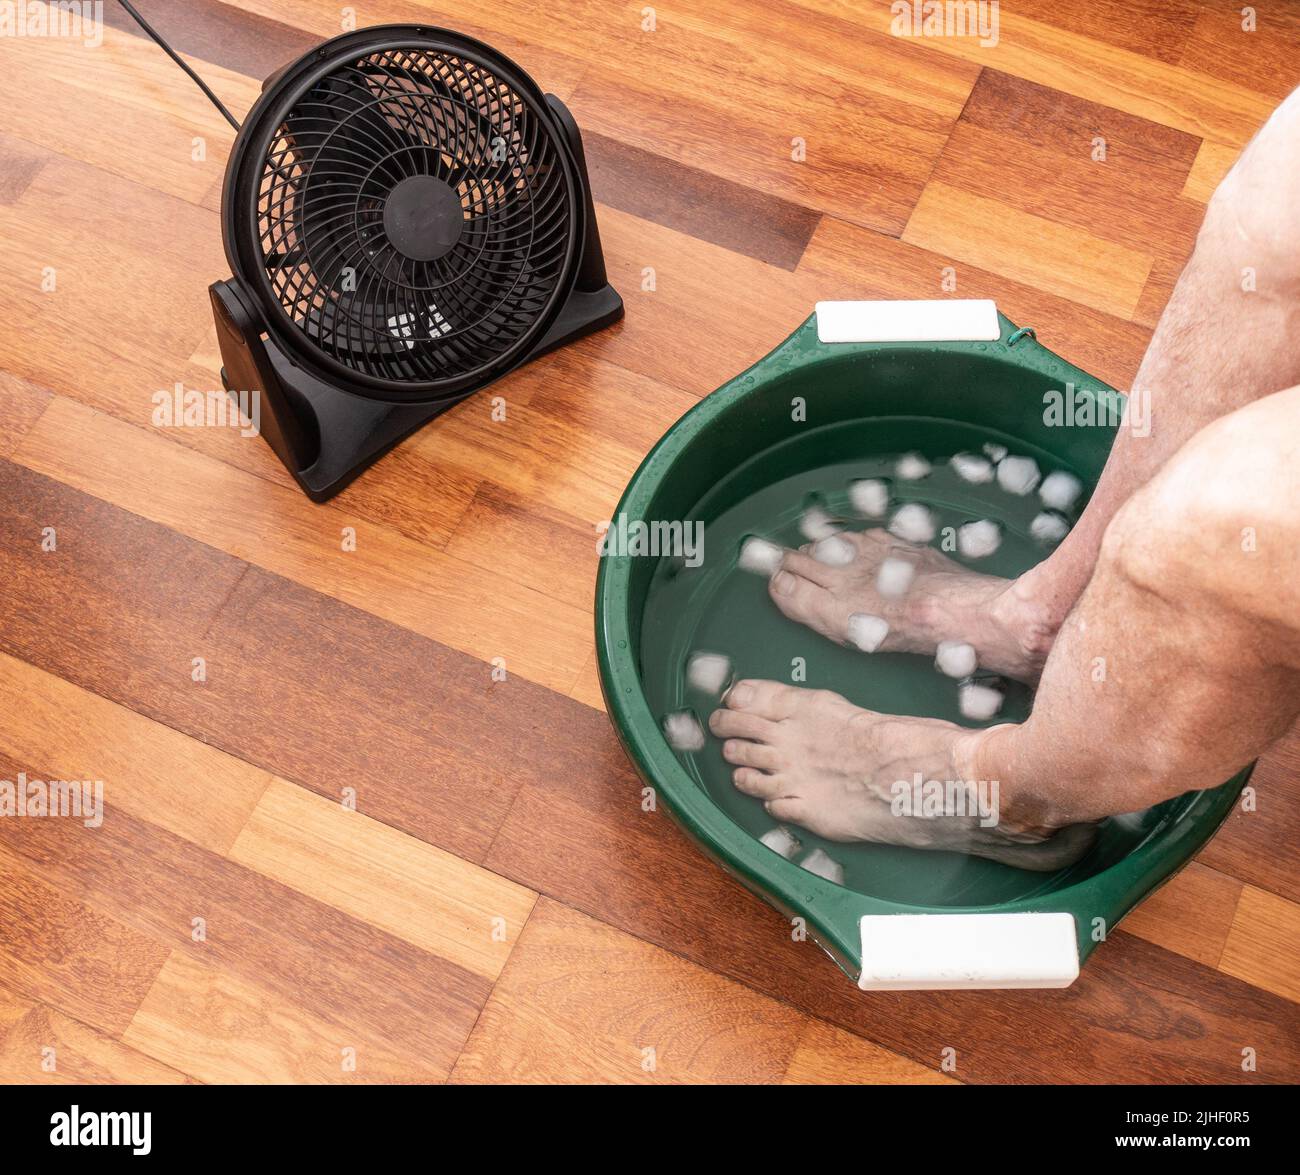 Man with feet in bowl of iced water next to fan during heatwave. Stock Photo